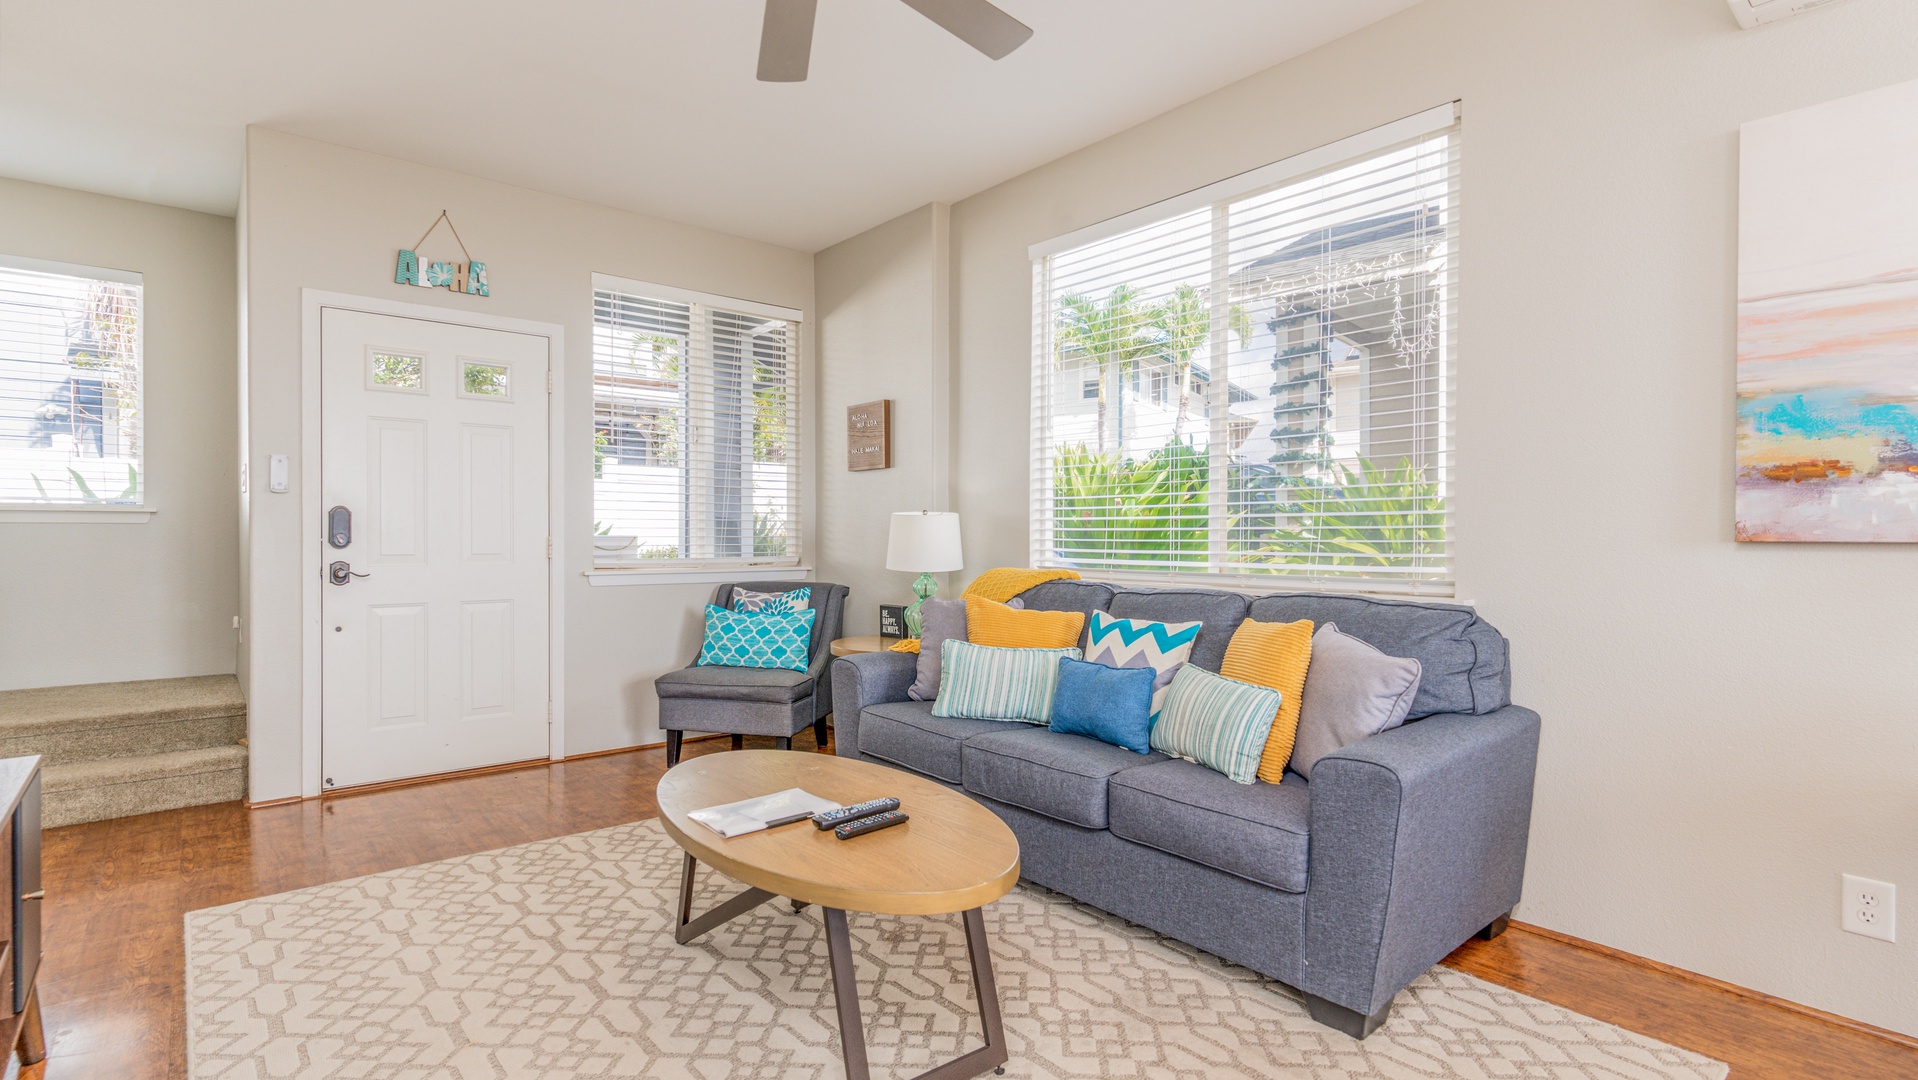 Kapolei Vacation Rentals, Makakilo Elele 48 - A plush couch awaits for your favorite movie/show.